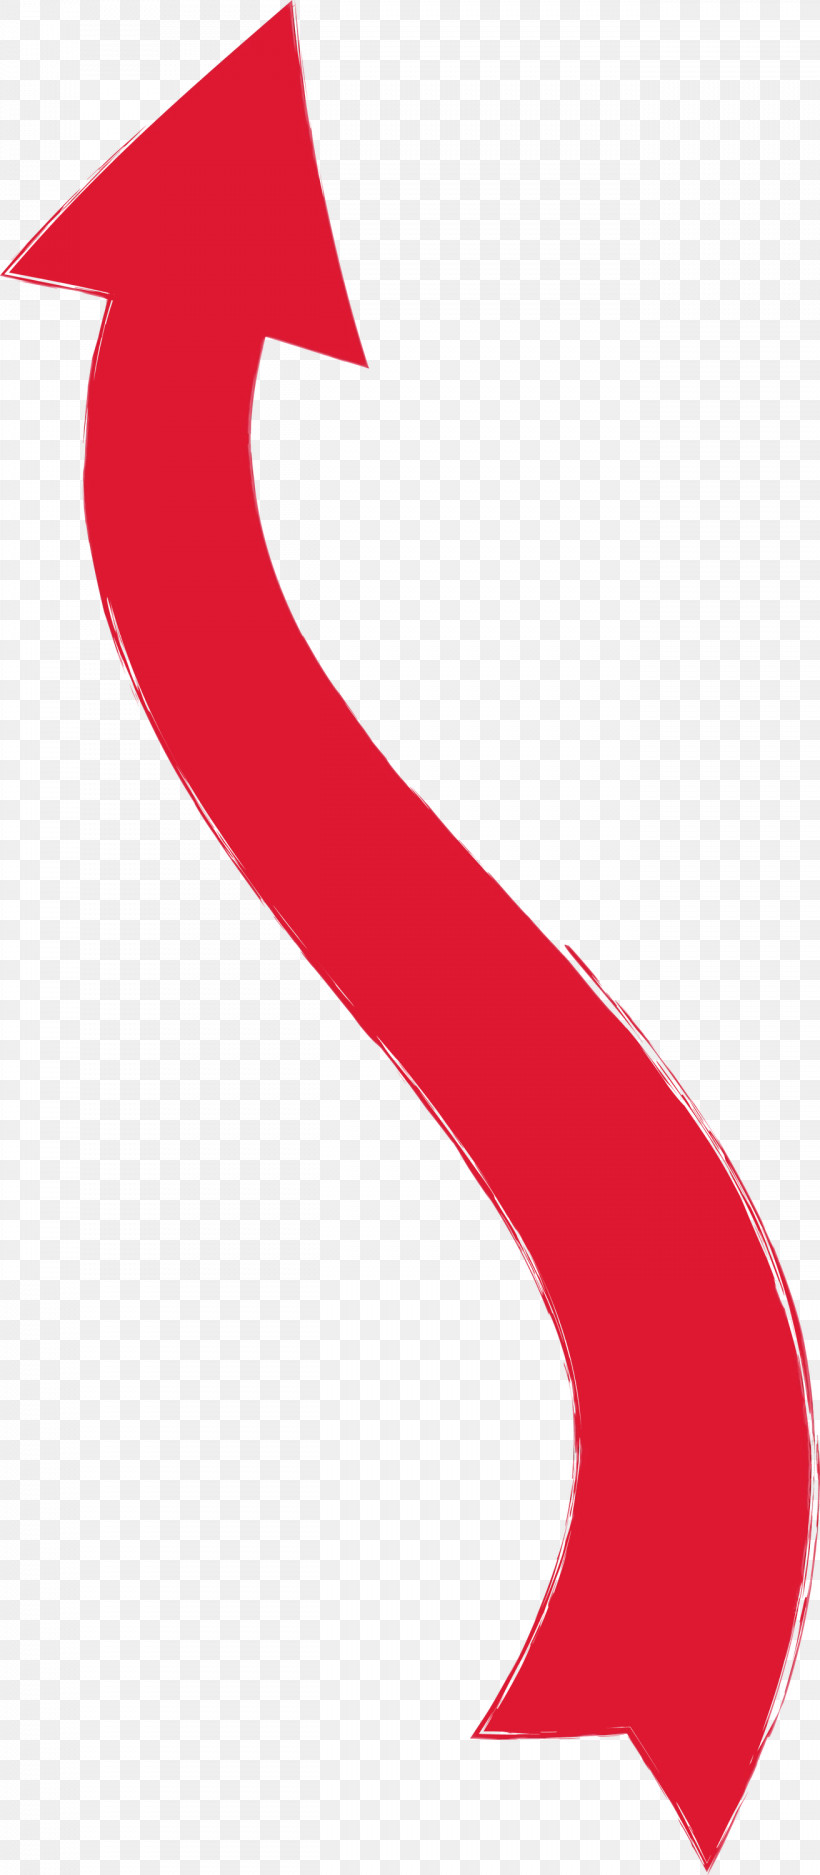 Red Material Property Symbol, PNG, 1312x3000px, Rising Arrow, Material Property, Paint, Red, Symbol Download Free